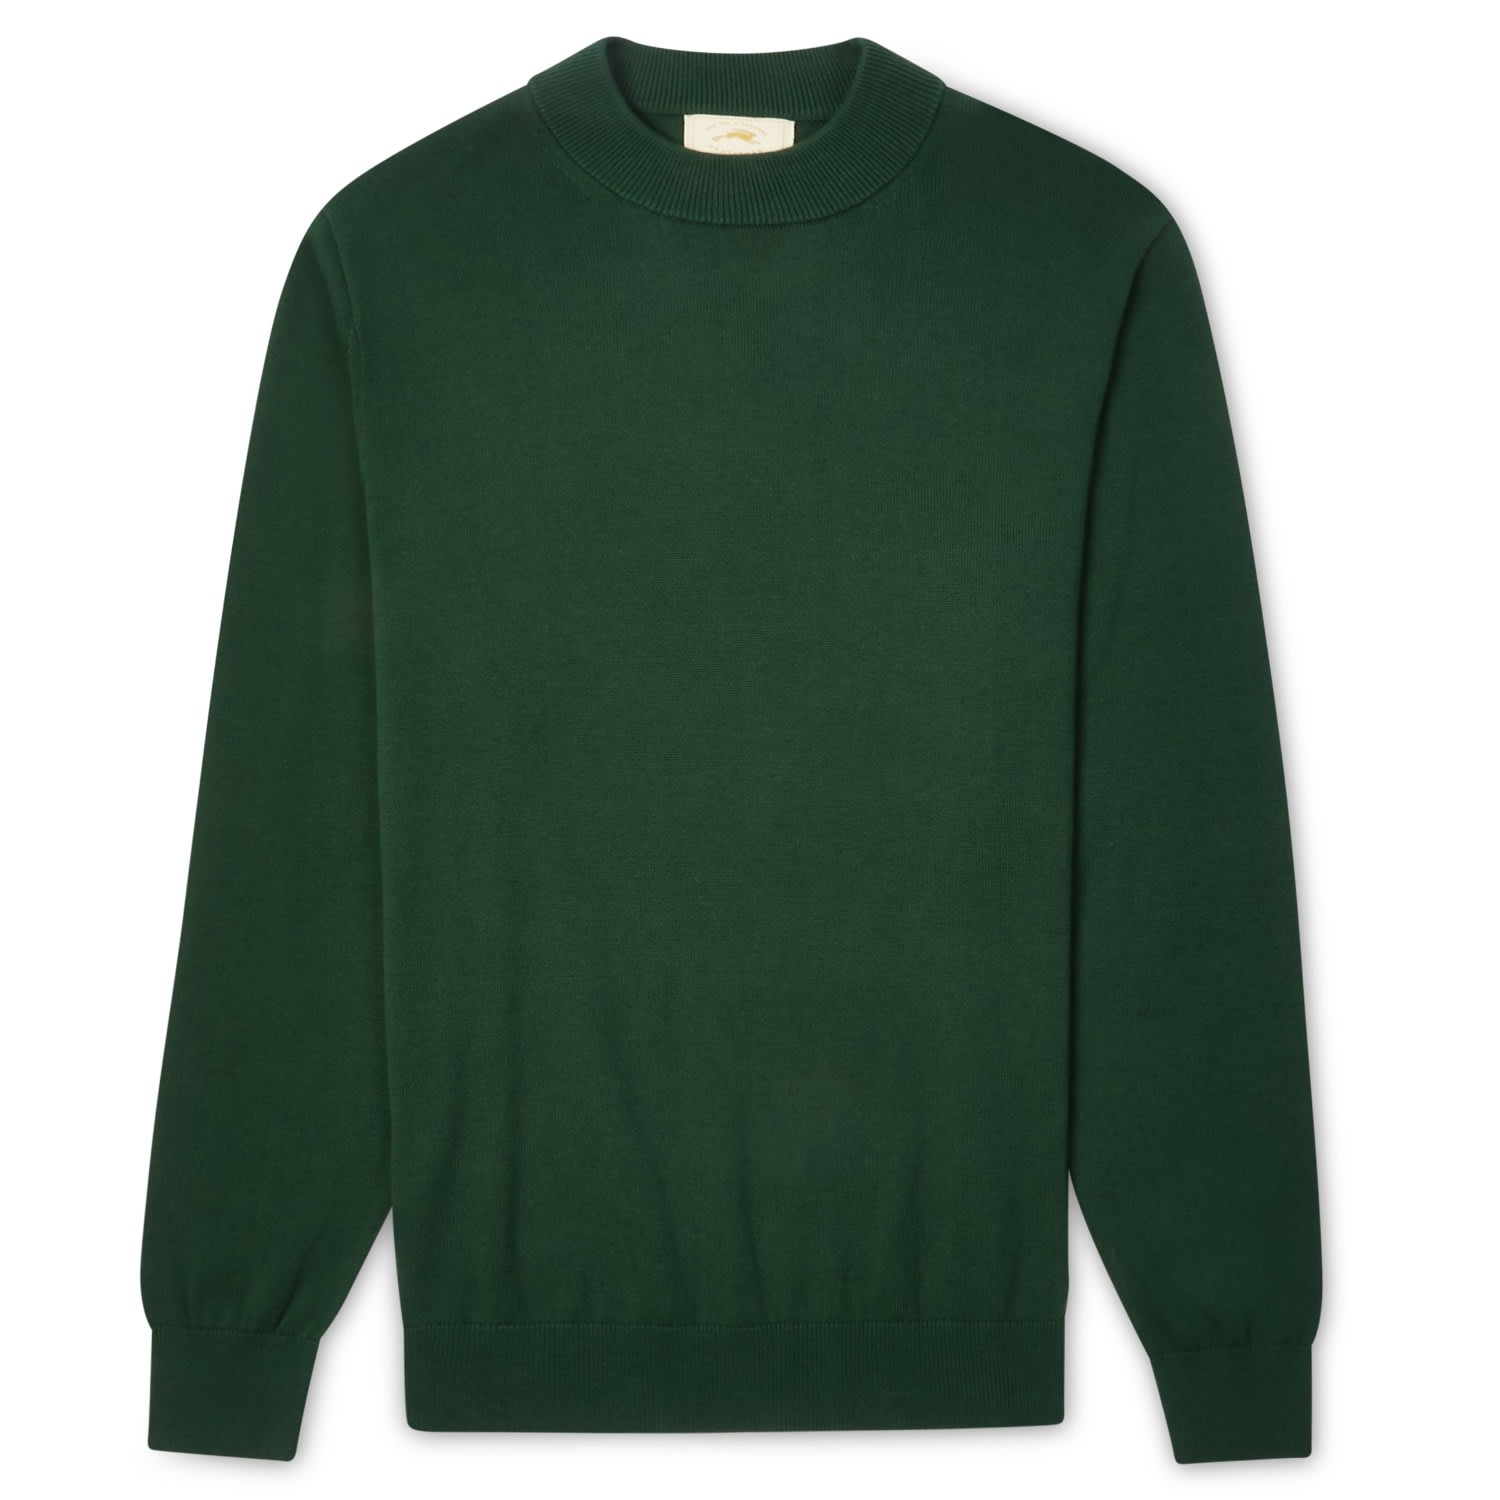 Shop Burrows And Hare Men's Mock Turtle Neck - Green